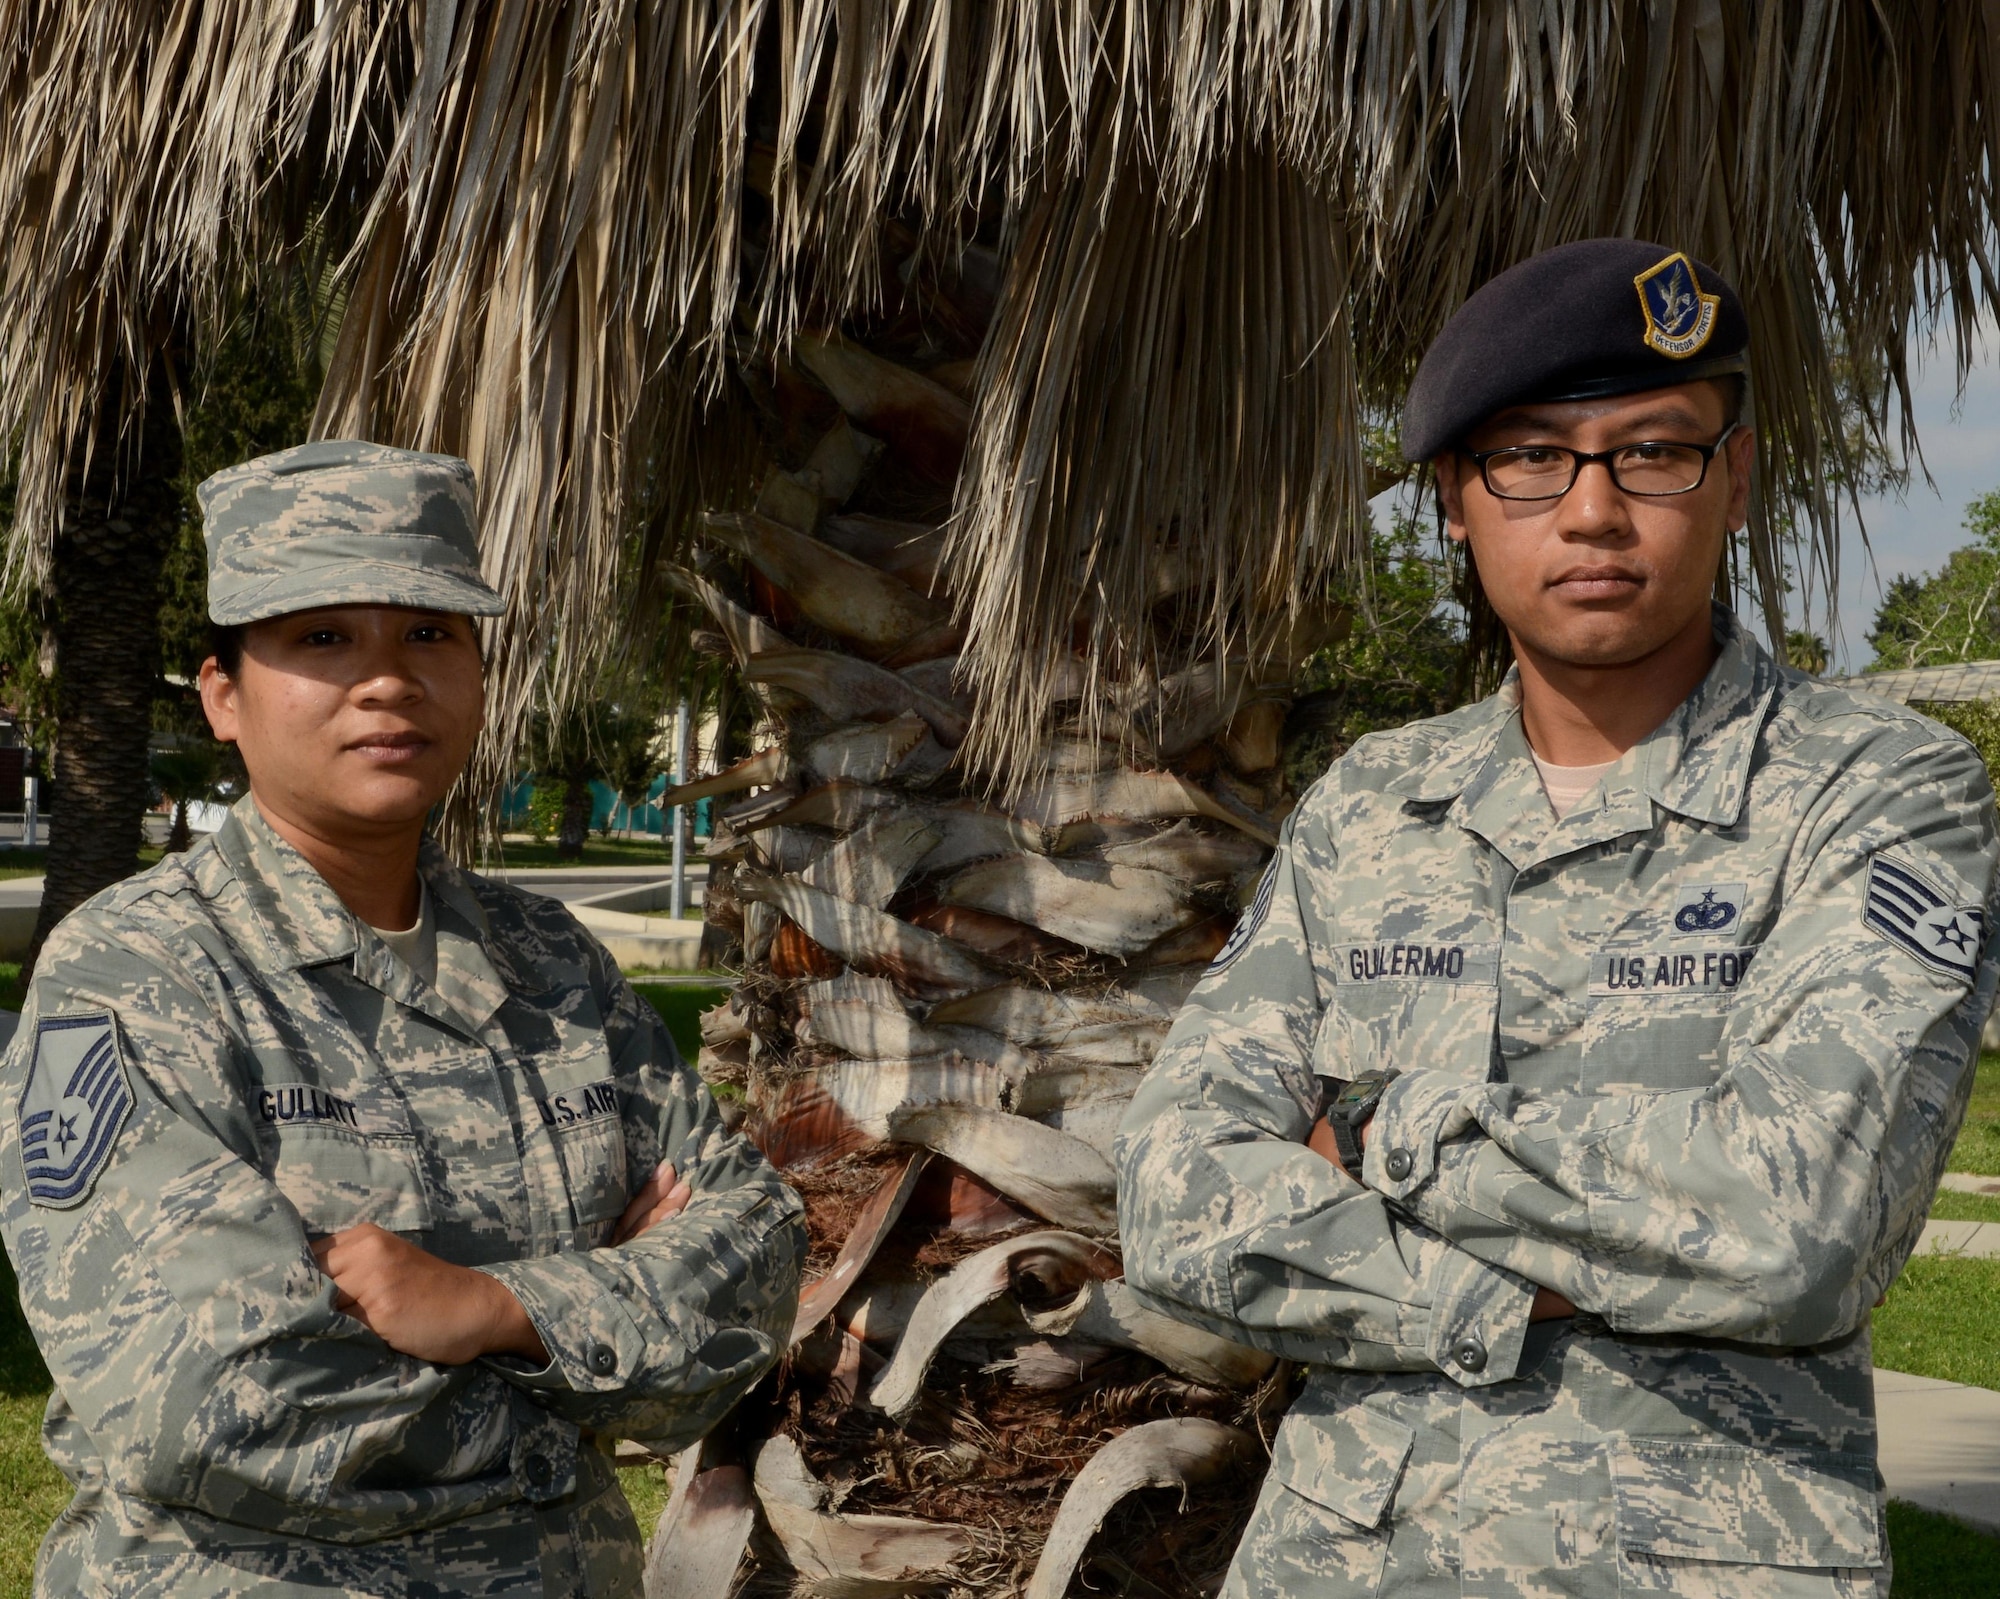 Master Sgt. Chasitity Gullatt, the 39th Air Base Wing Equal Opportunity superintendent, and her brother, Staff Sgt. Bryant Guillermo, a 39th Security Forces Squadron vault storage area supervisor, are stationed together at Incirlik Air Base, Turkey. This is the first time in their careers that they have been stationed together. (U.S. Air Force photo/Staff Sgt. Caleb Pierce)